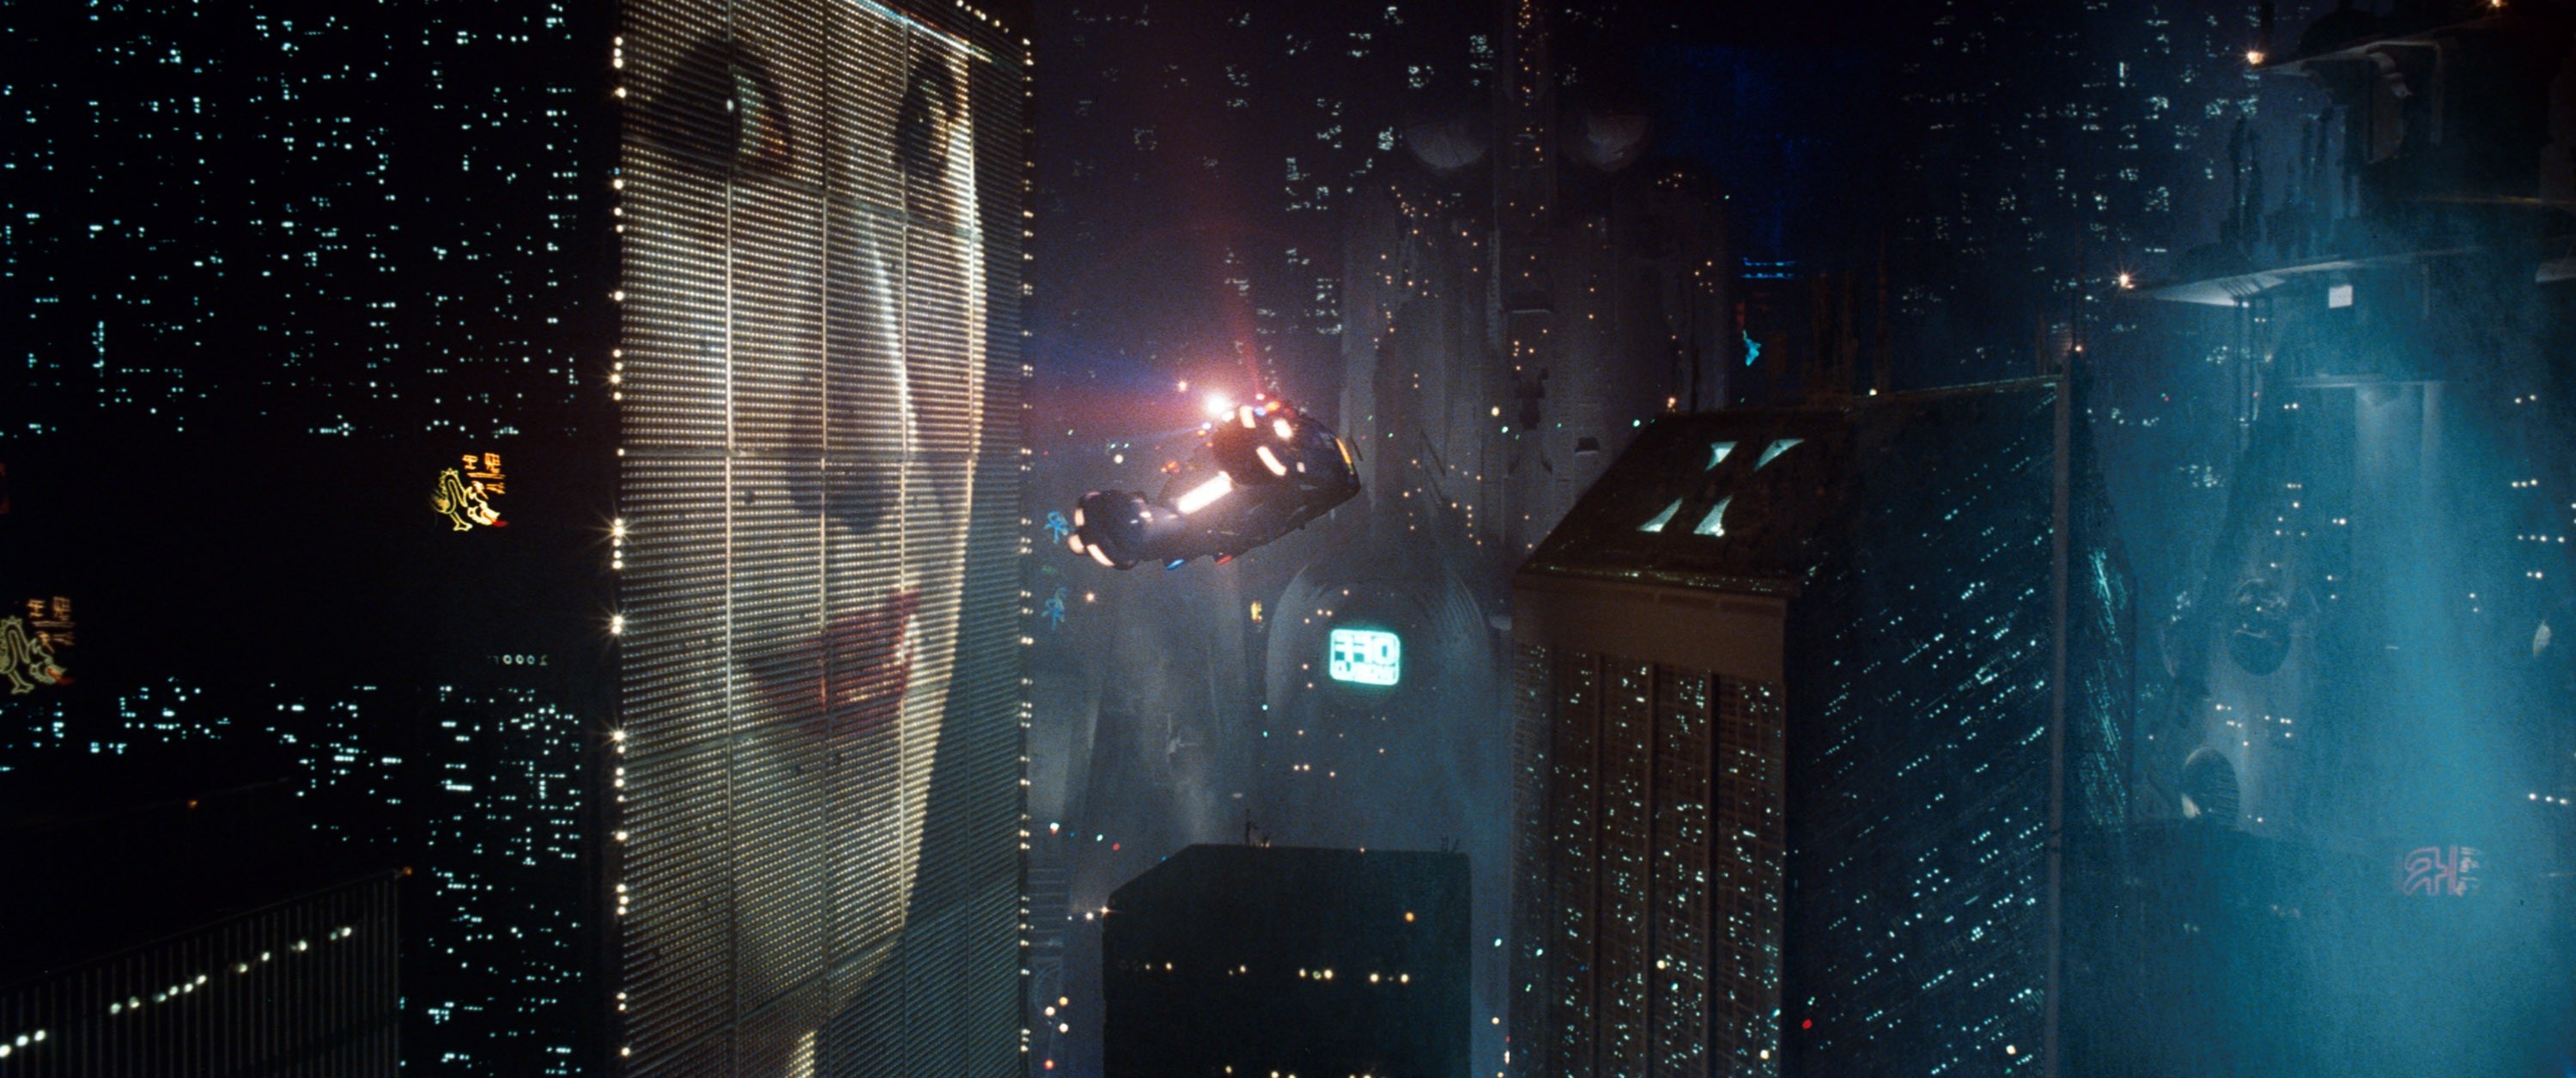 City, Blade Runner, Movies Wallpapers HD / Desktop and Mobile Backgrounds